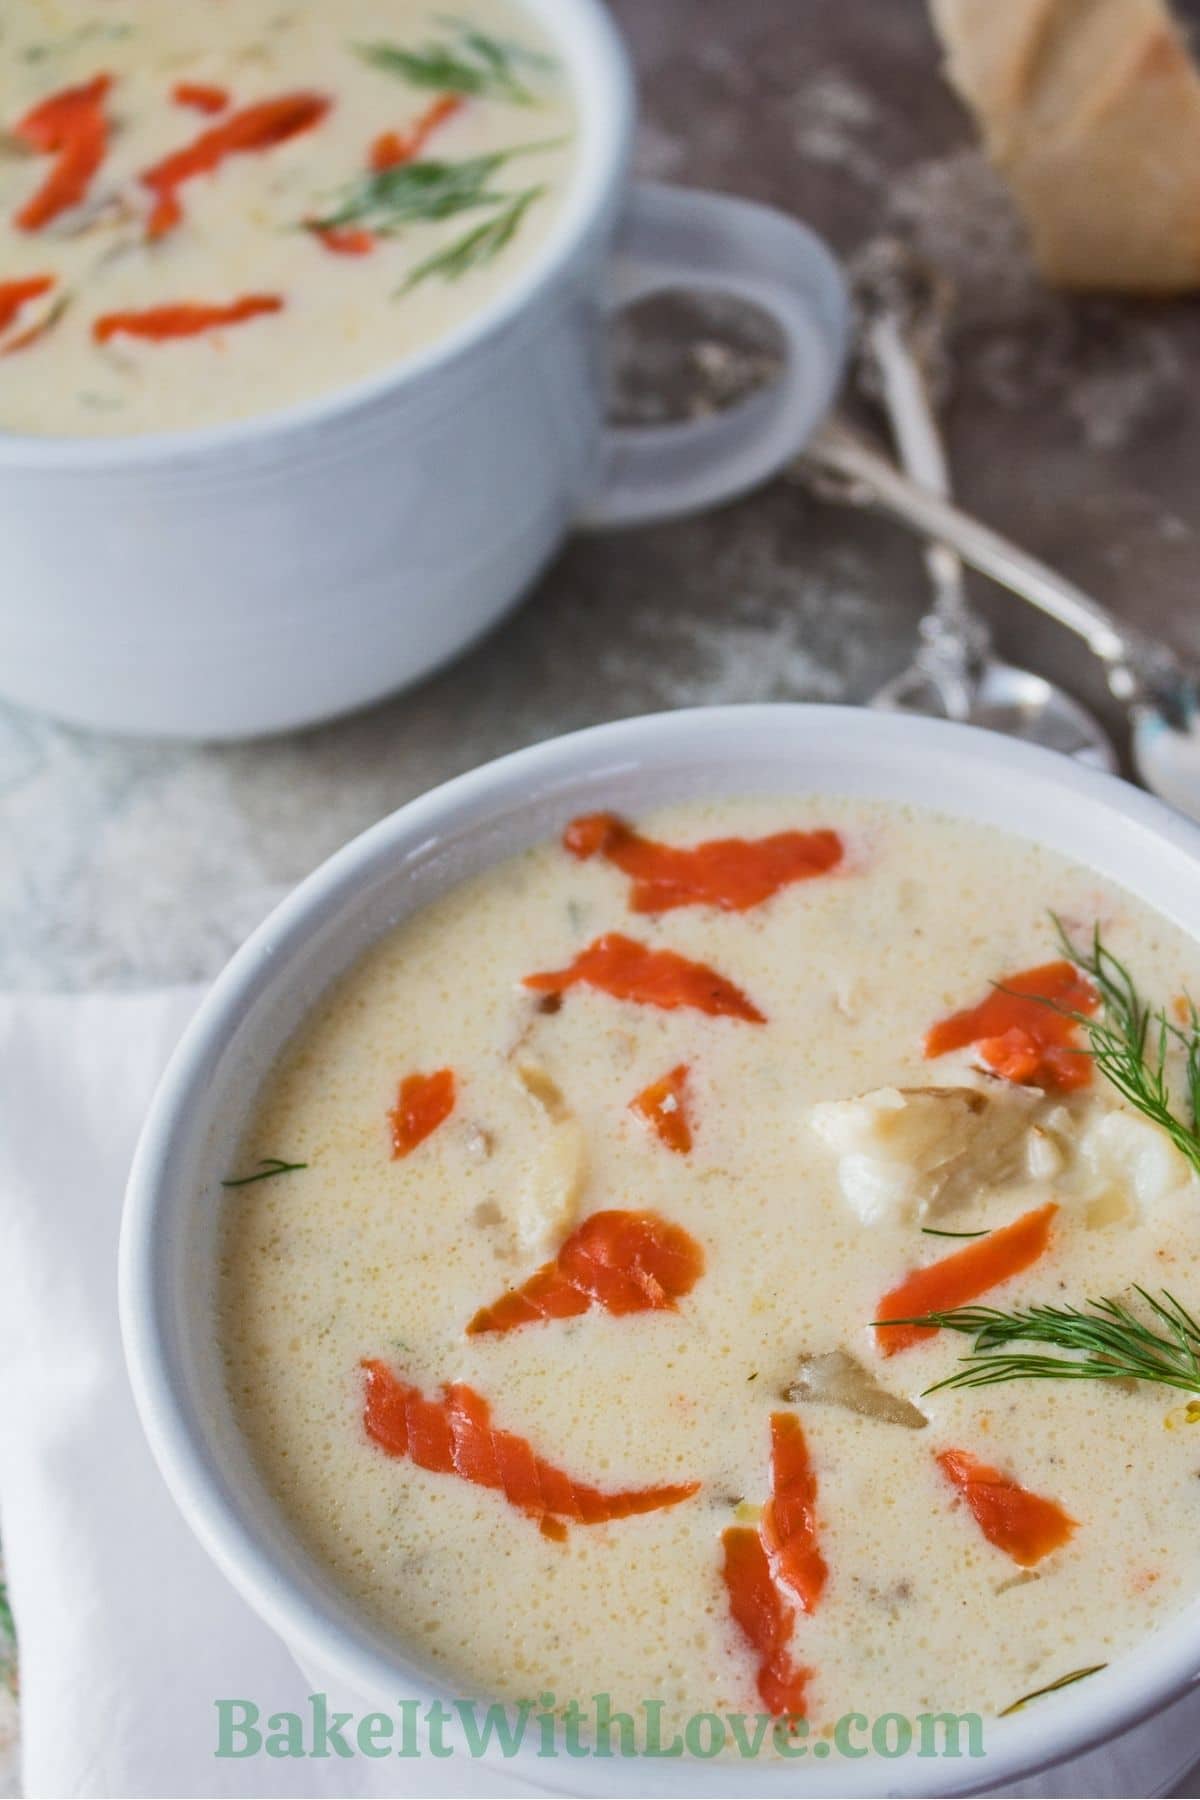 Seafood chowder with smoked salmon served in white bowls.